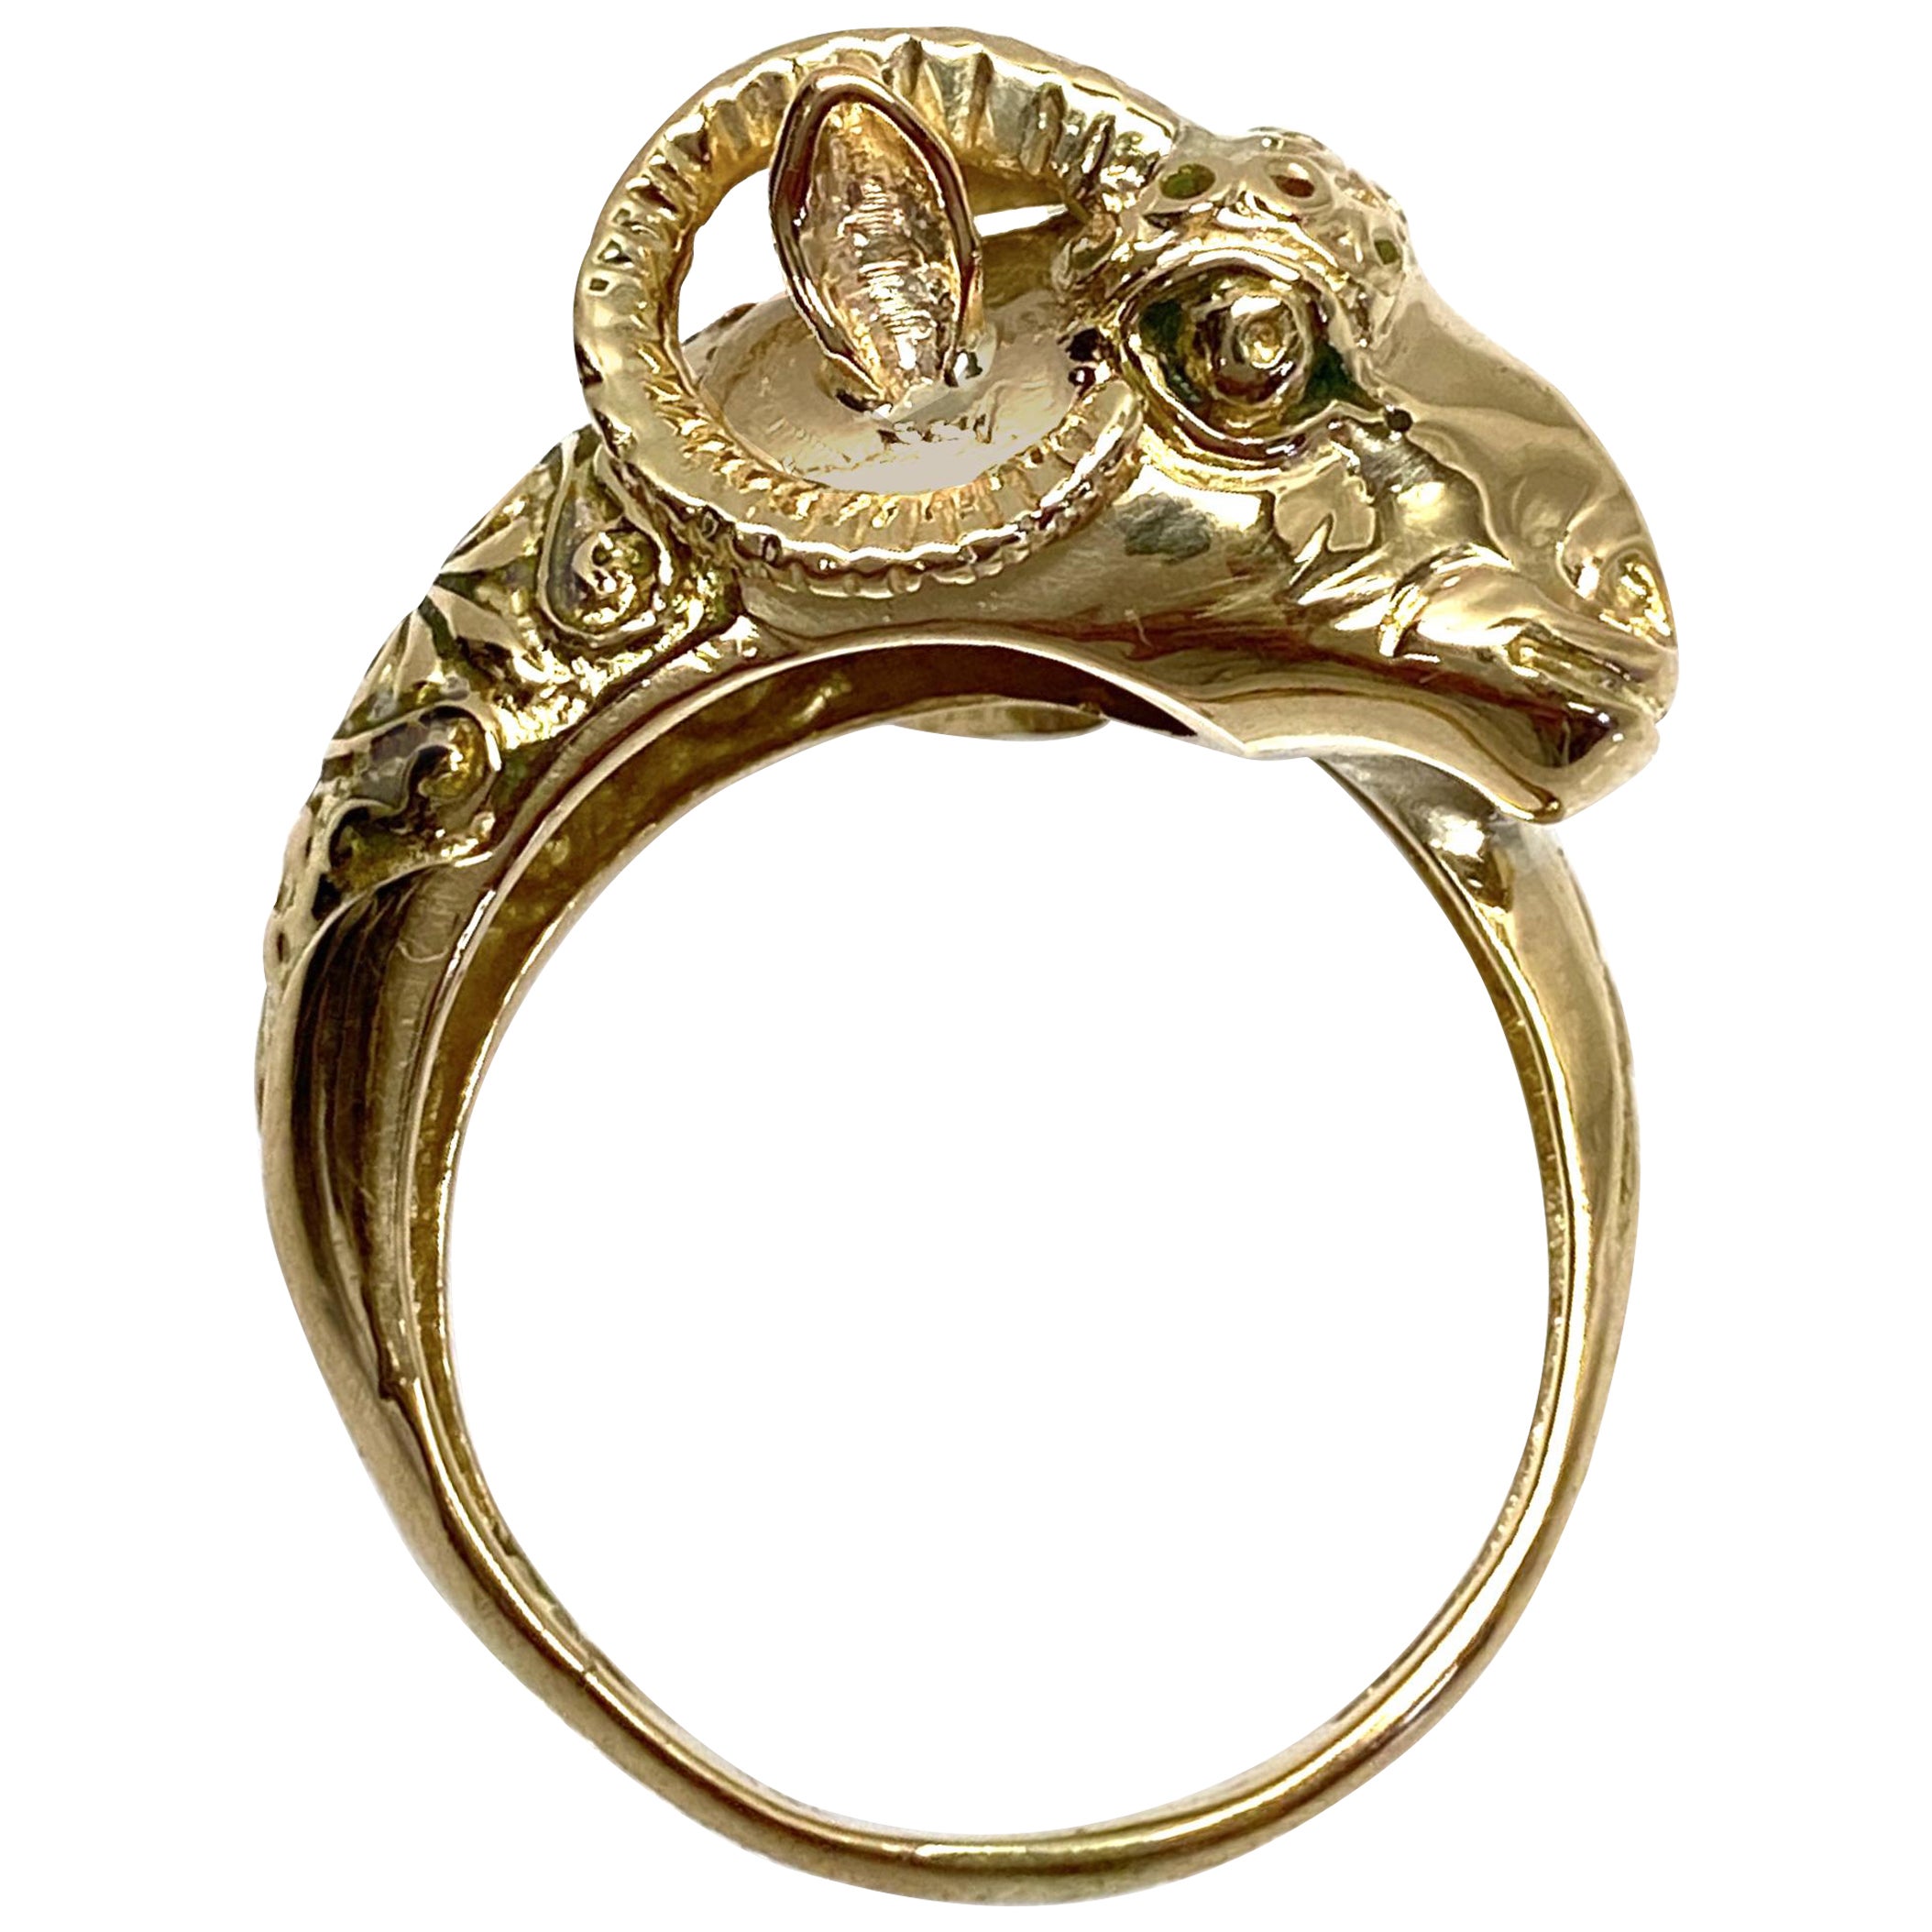 Ram or Aries Figural Bypass Ring in 18 Karat Yellow Gold